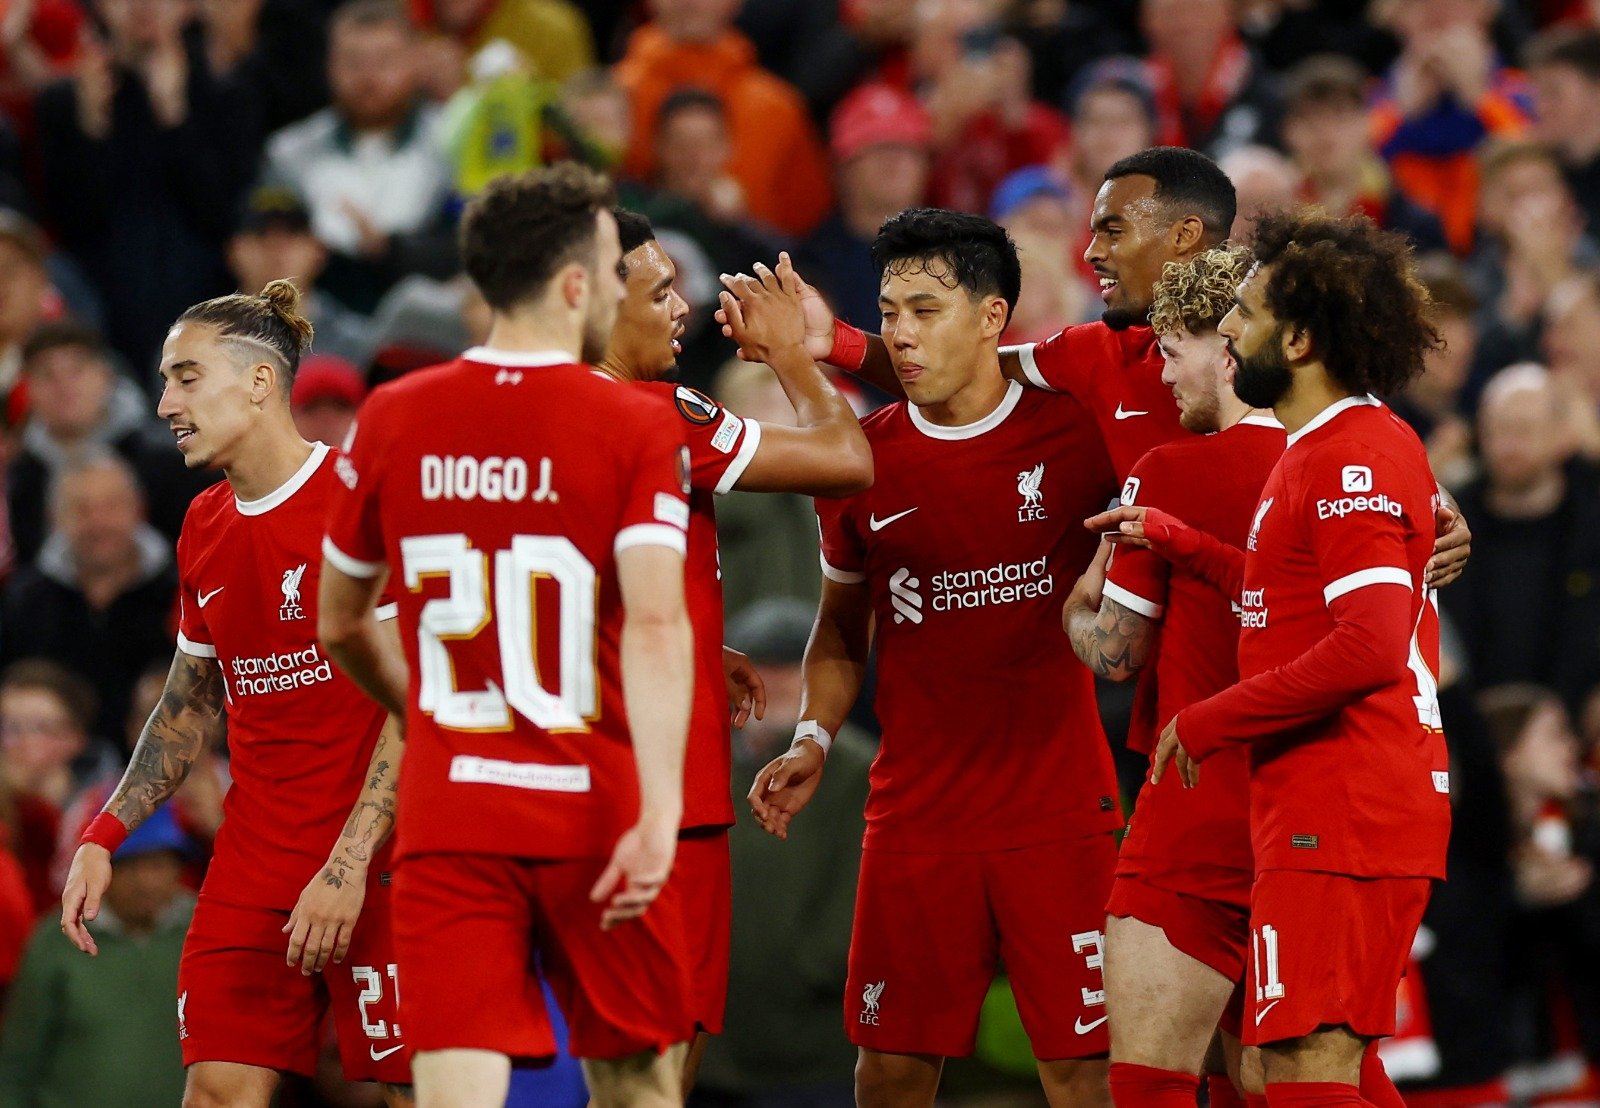 Jamie Carragher believes Liverpool can challenge Man City this season